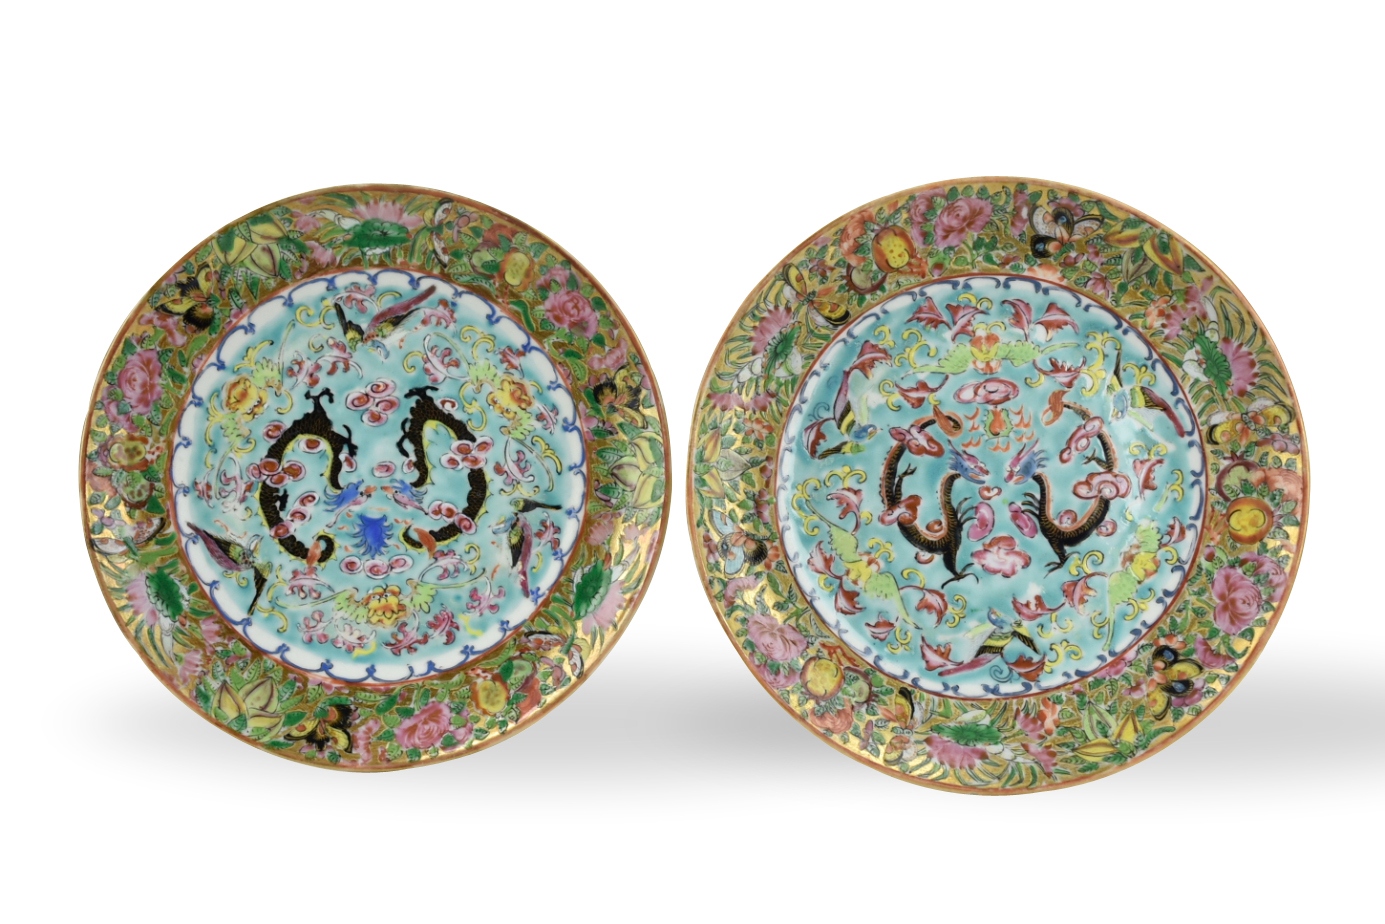 PAIR OF CHINESE CANTON GLAZED PLATE